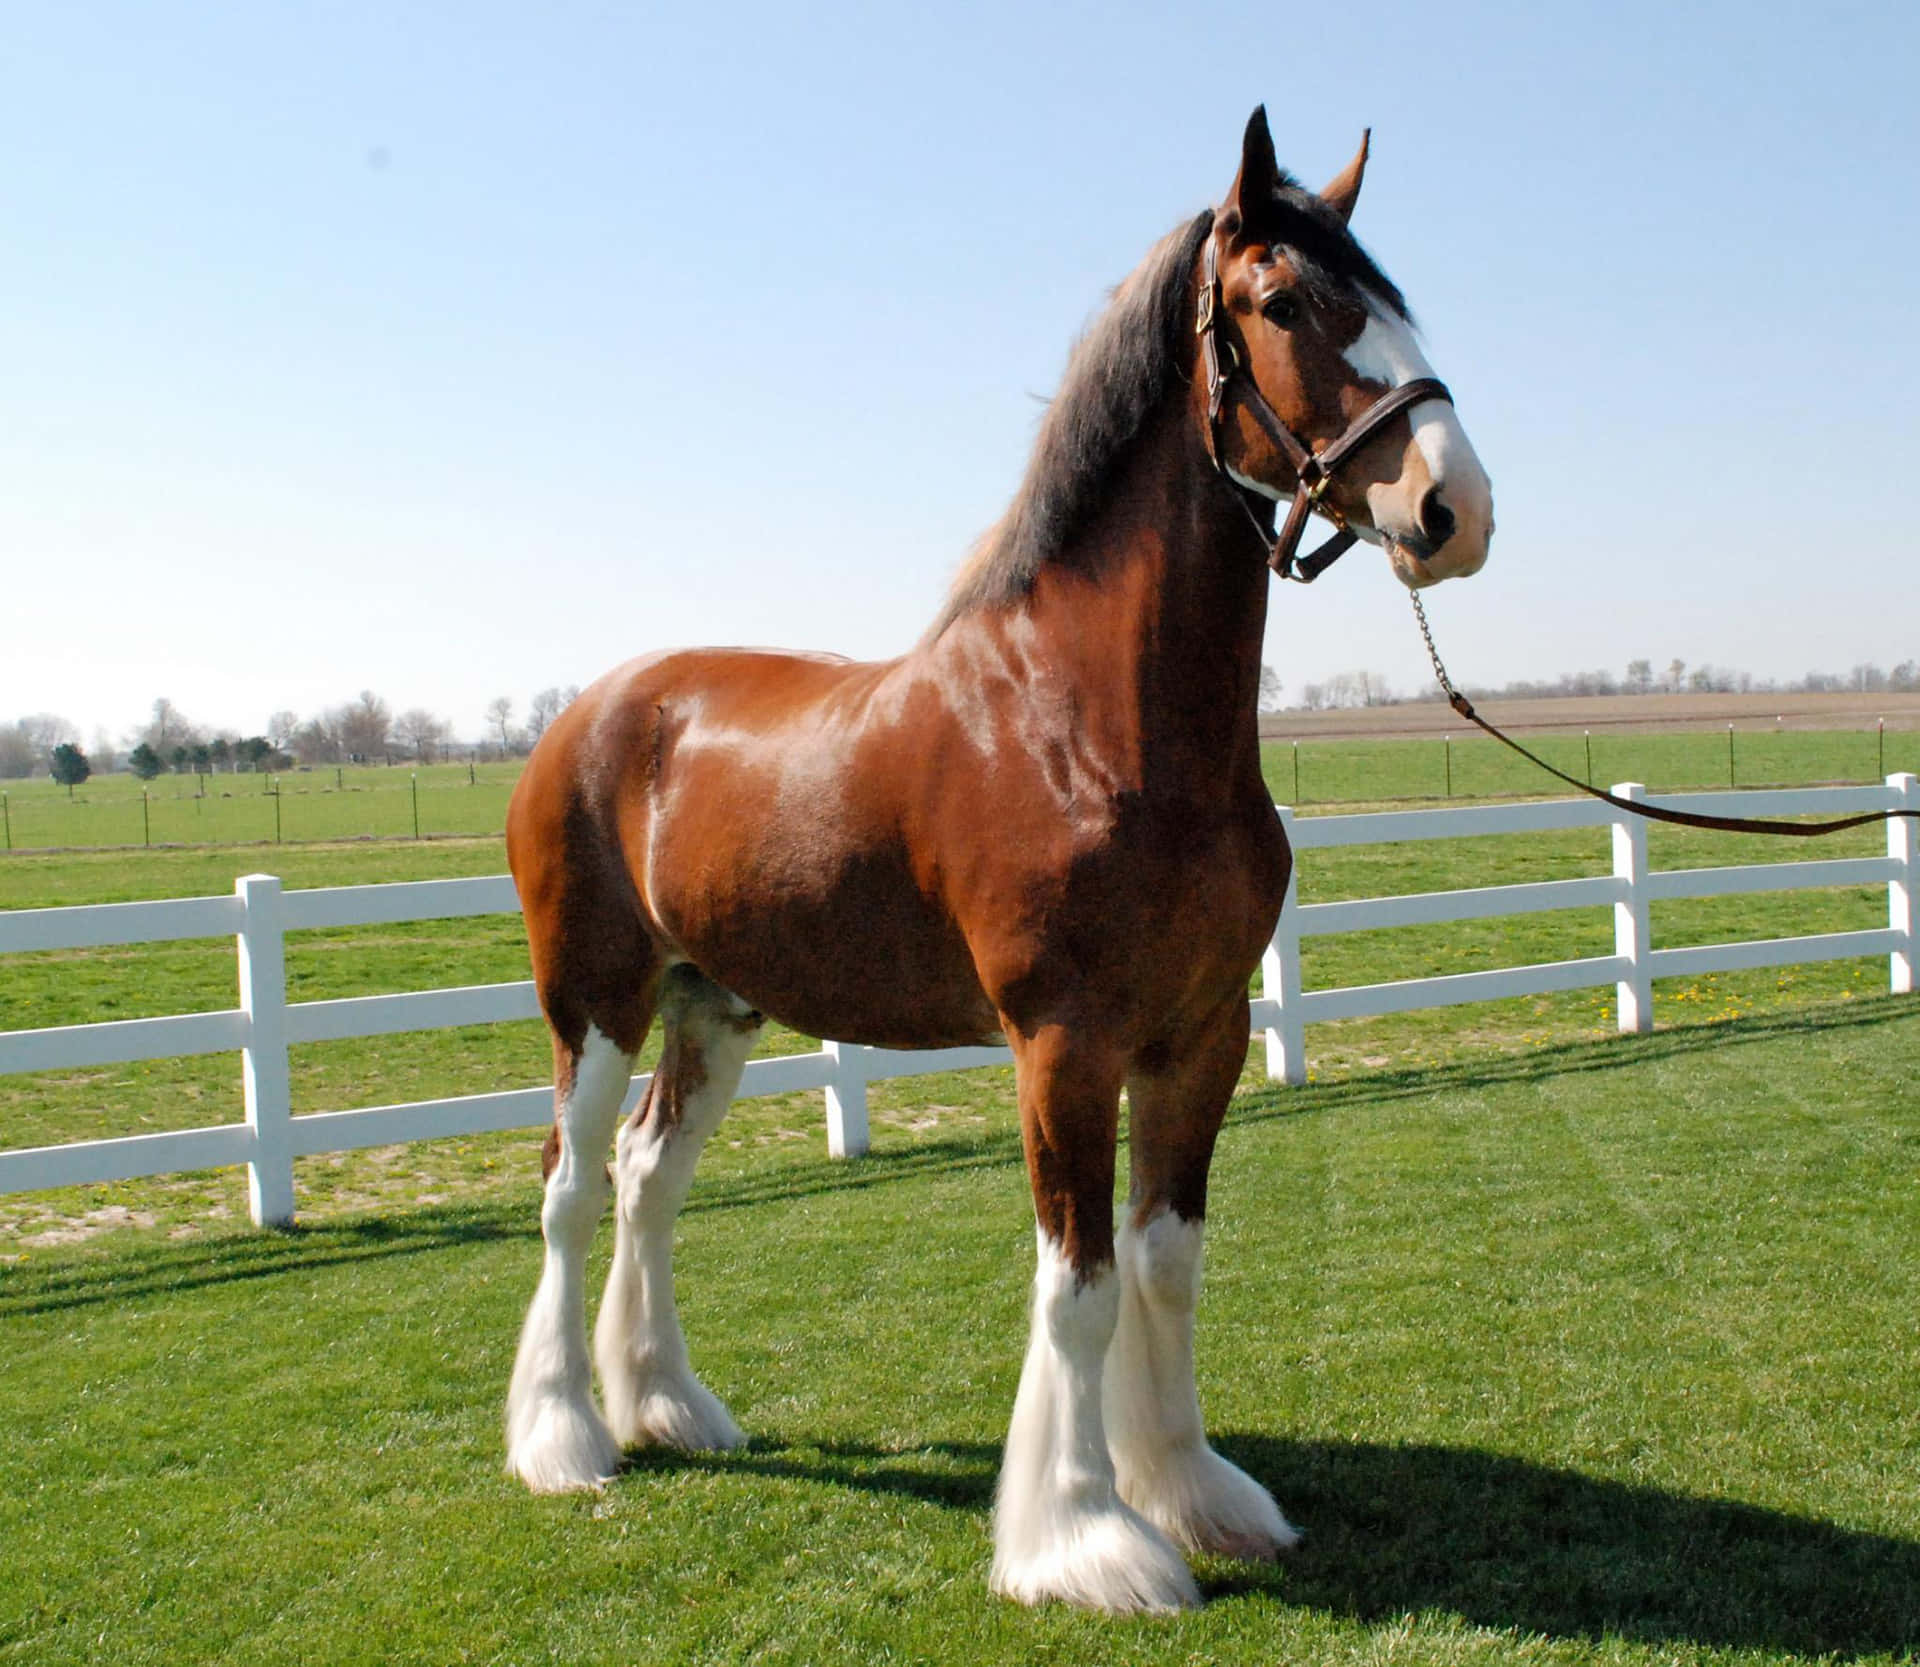 Majestic Clydesdale Horse in its Natural Habitat